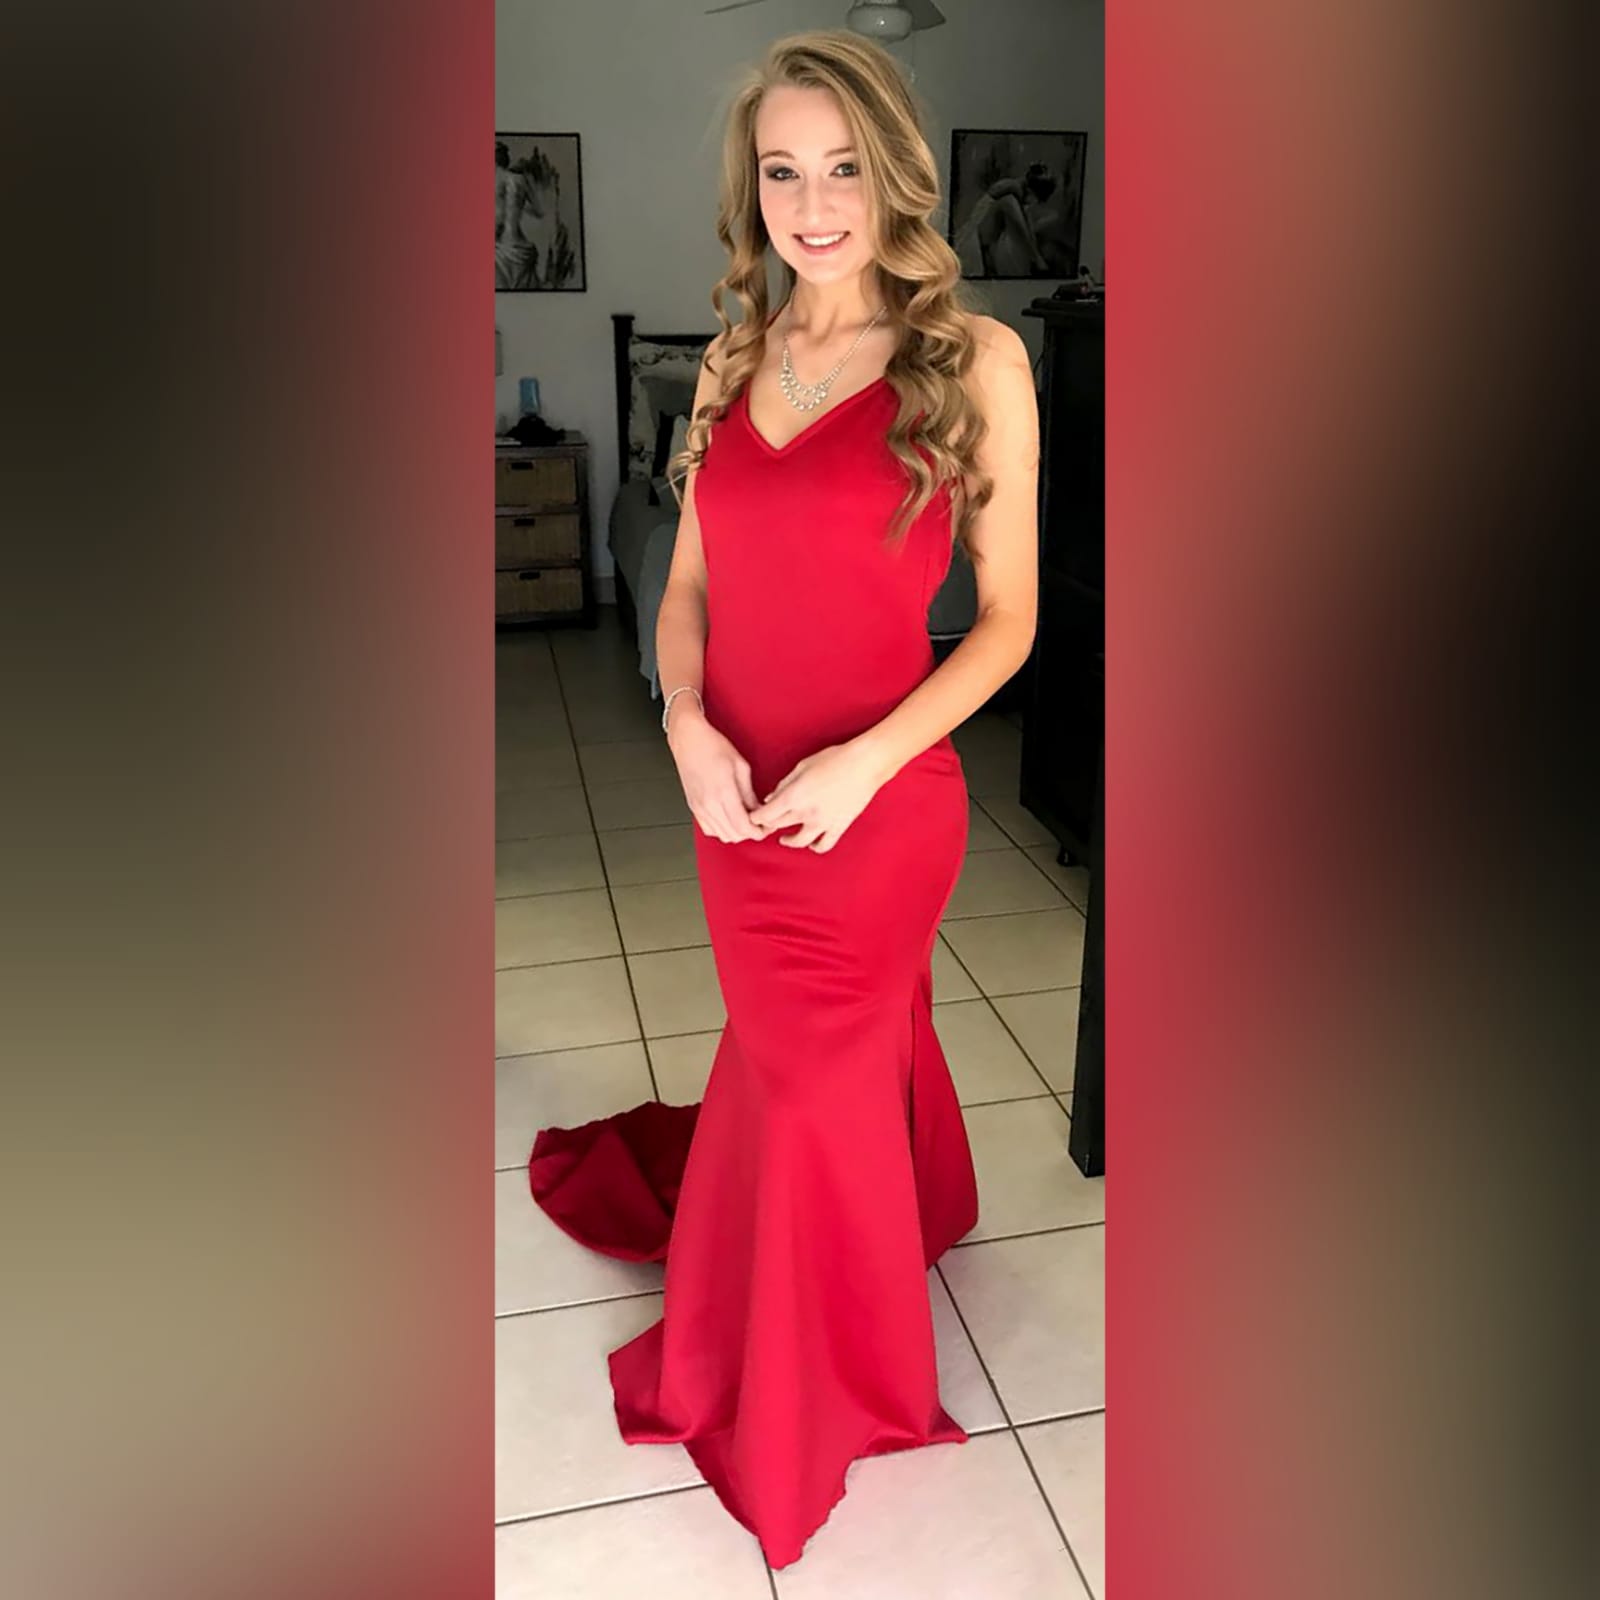 Red soft mermaid prom dress with a v neckline 4 red soft mermaid prom dress with a v neckline, a low open back and thin crossed shoulder straps, with a train.